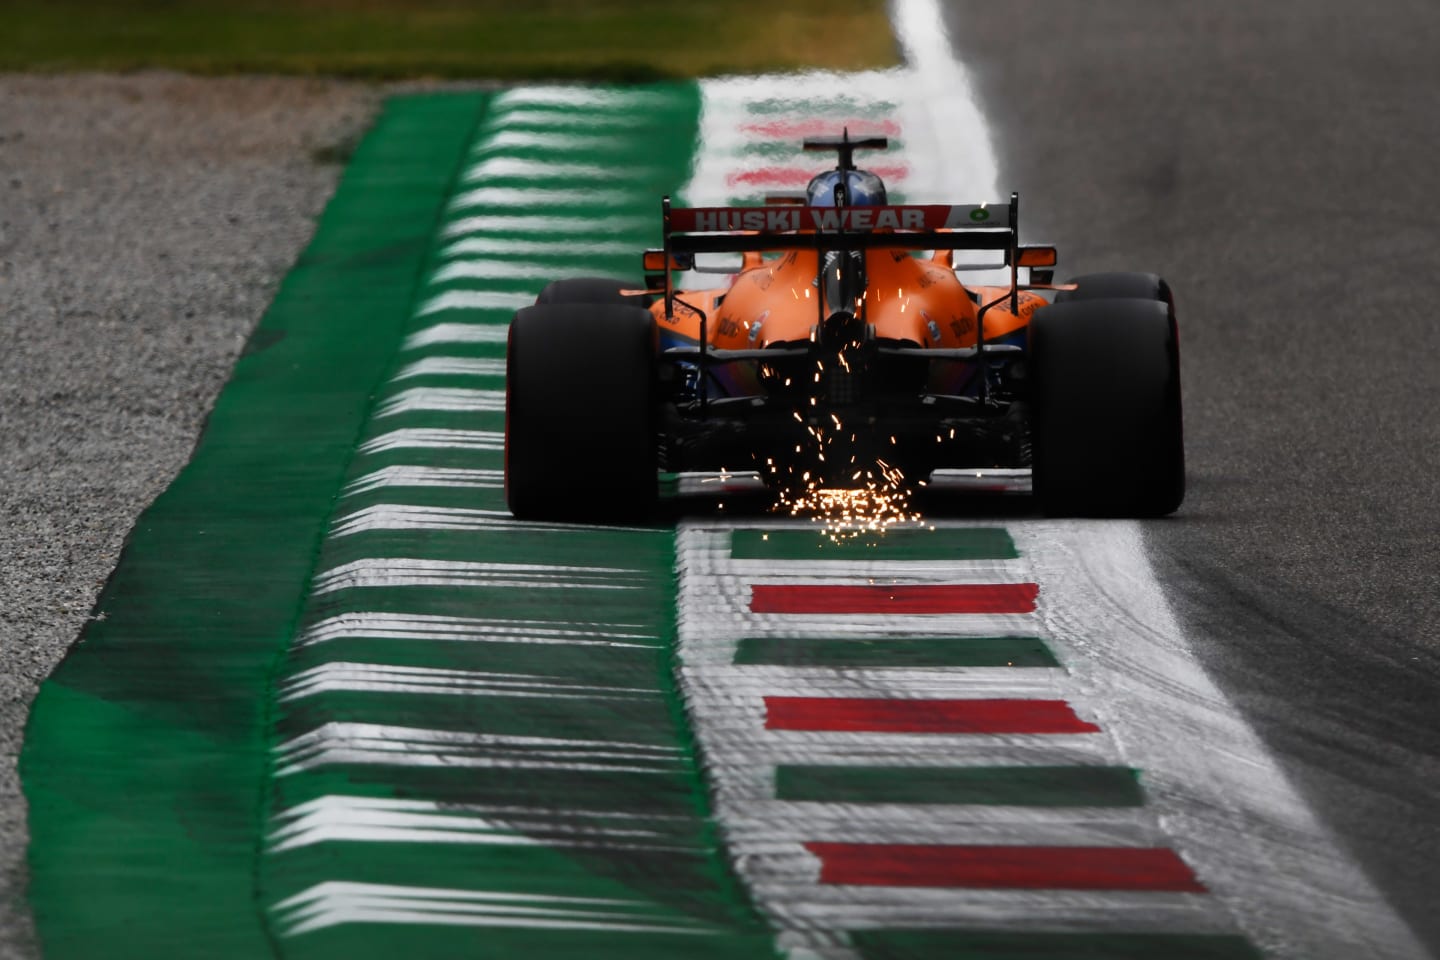 MONZA, ITALY - SEPTEMBER 10: Daniel Ricciardo of Australia driving the (3) McLaren F1 Team MCL35M Mercedes during qualifying ahead of the F1 Grand Prix of Italy at Autodromo di Monza on September 10, 2021 in Monza, Italy. (Photo by Rudy Carezzevoli/Getty Images)